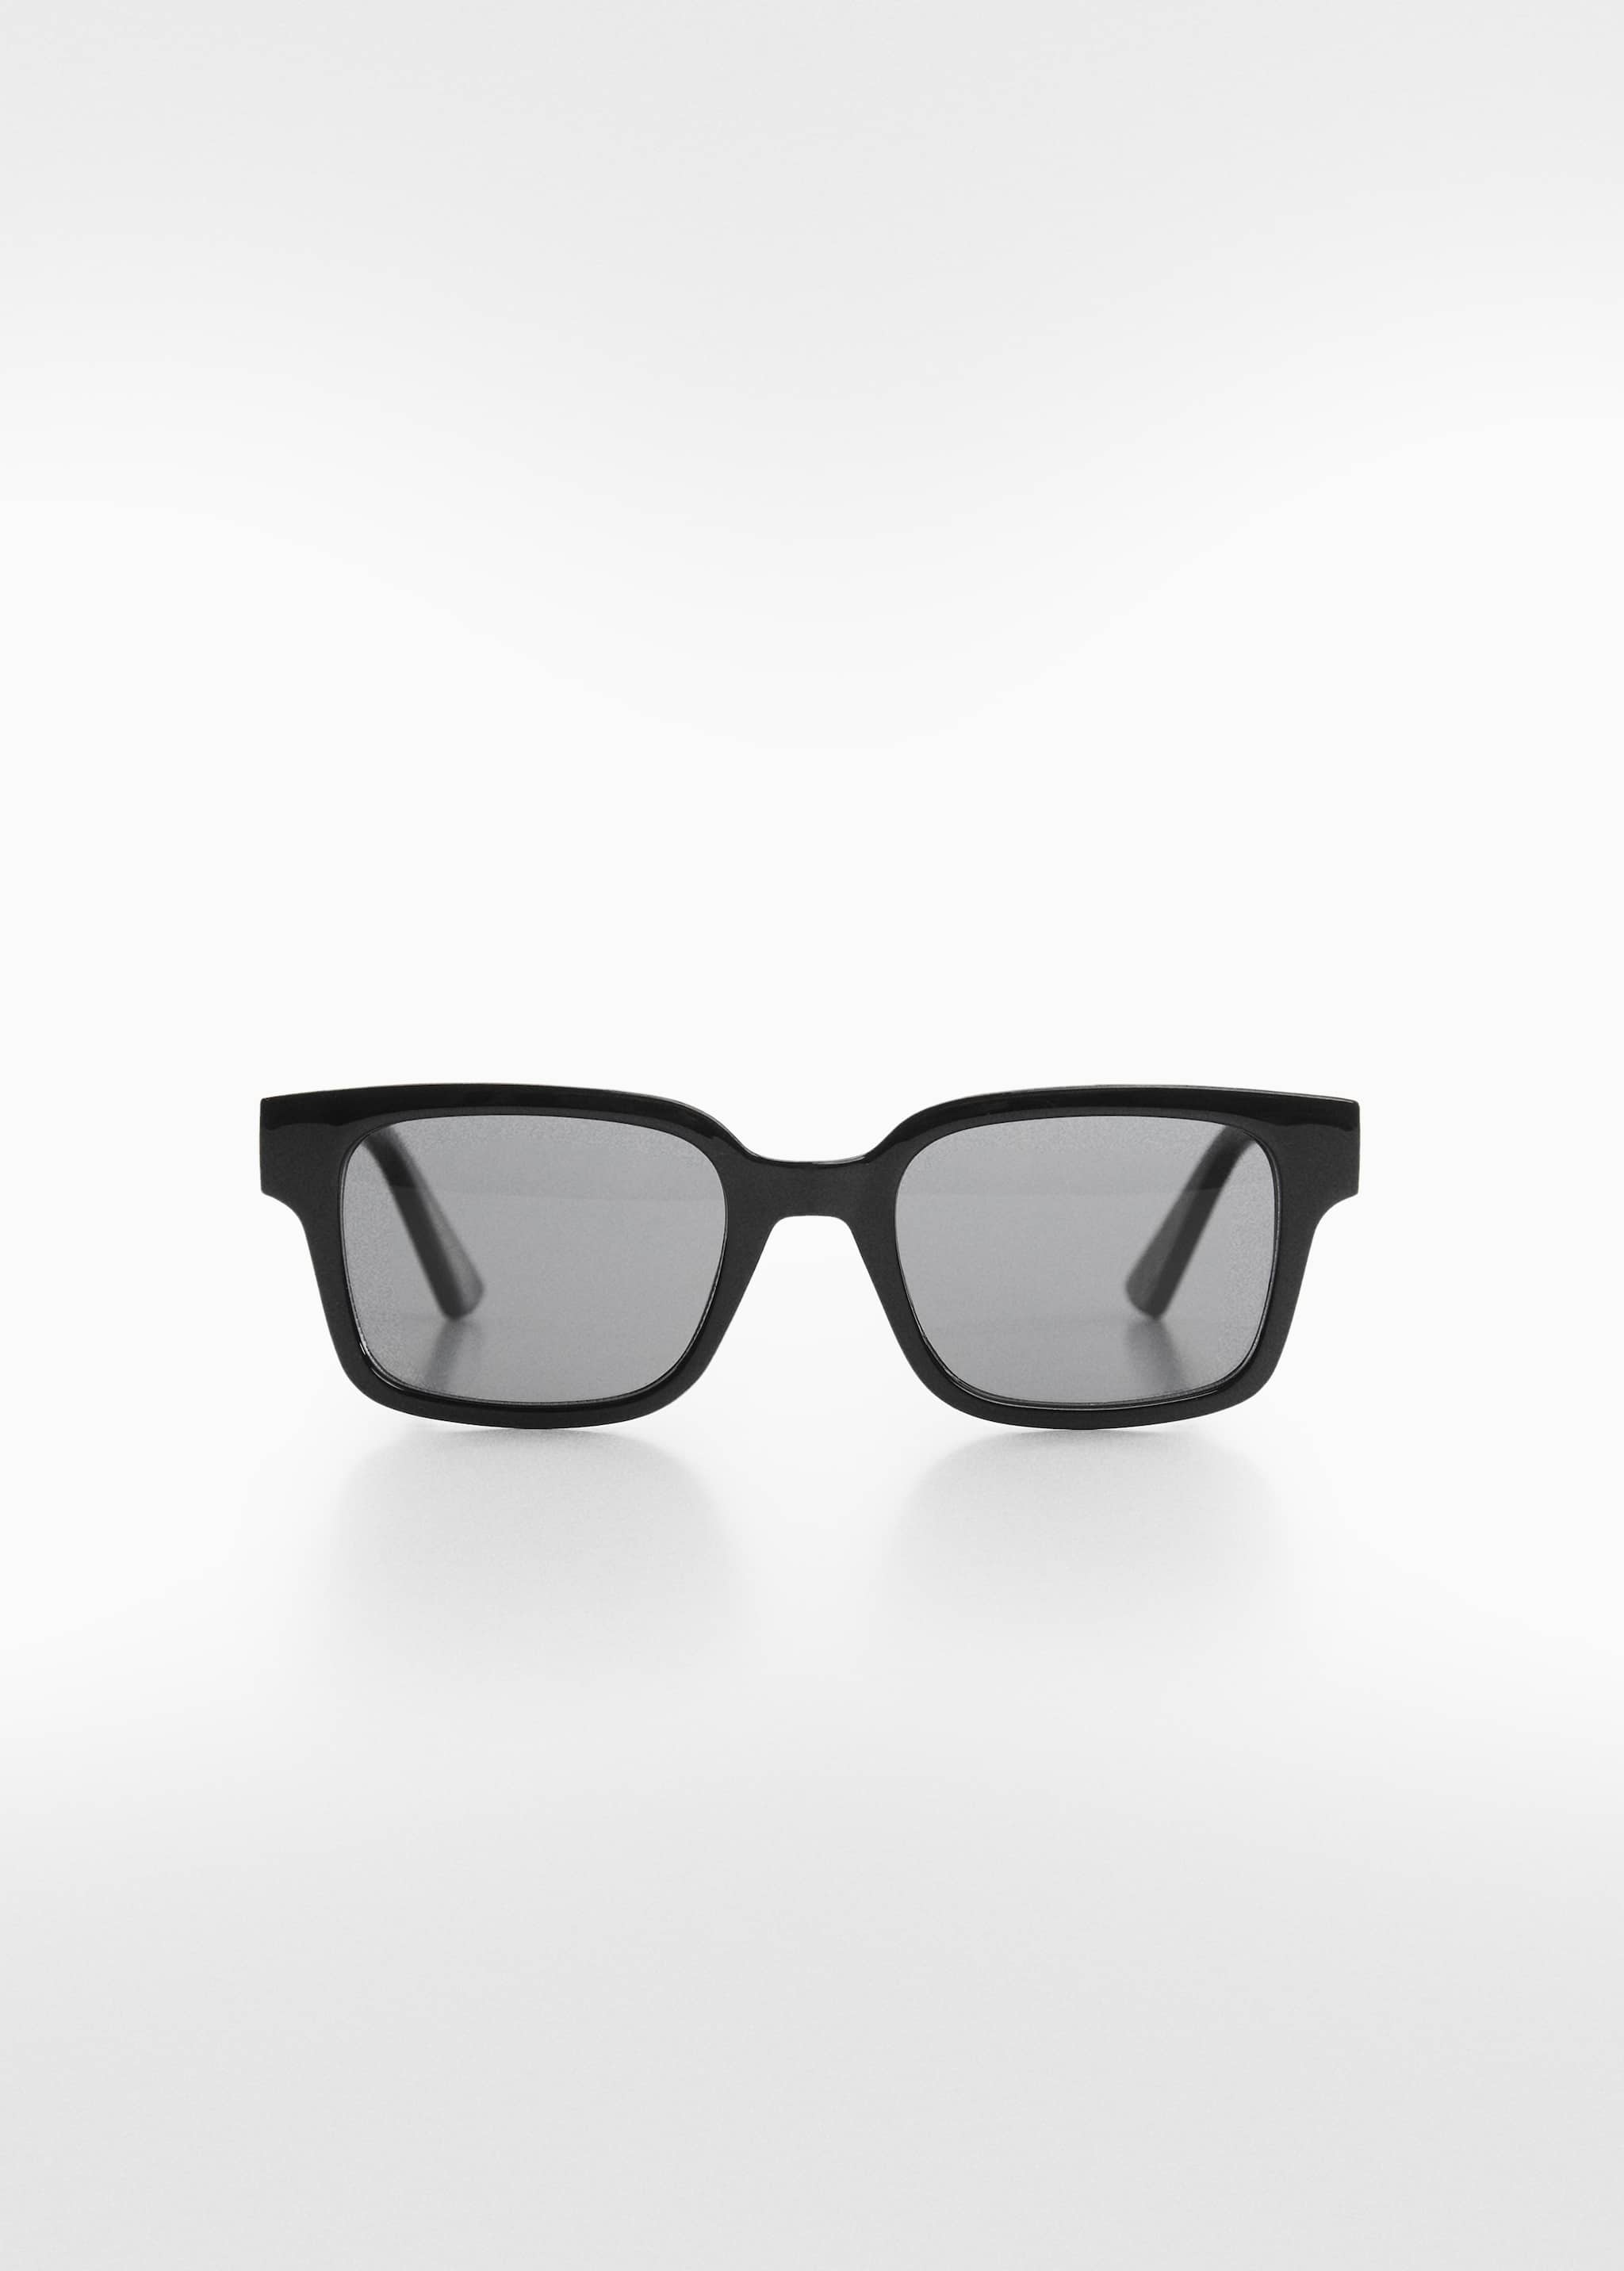 Square sunglasses - Article without model